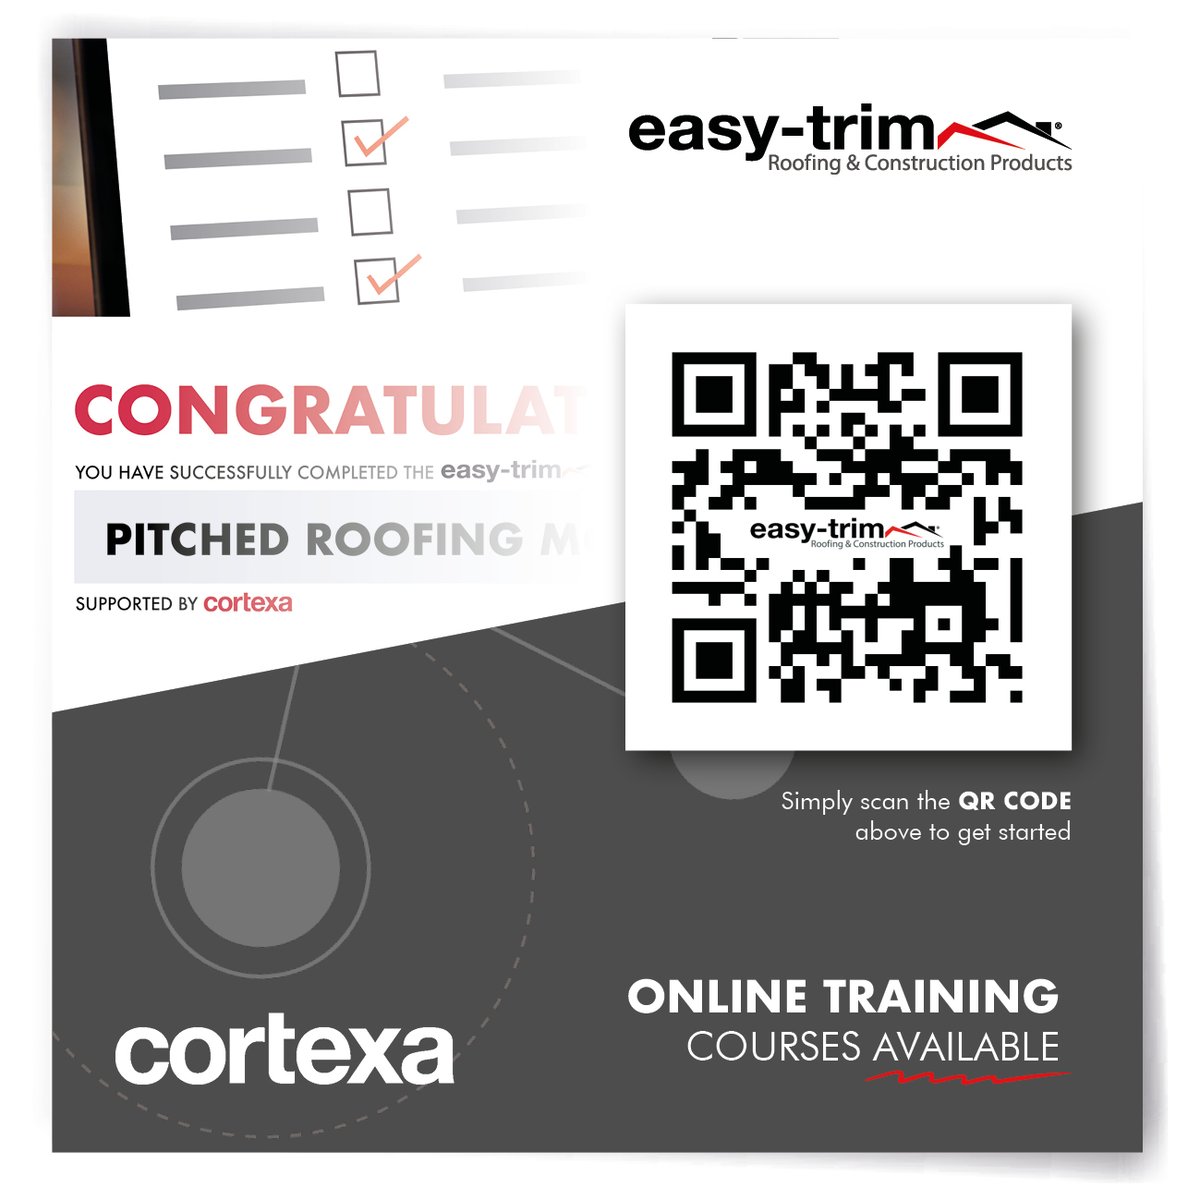 💻🏅 Learn about the full pitched roofing range from Easy-Trim in this 20-minute training module. Understand the range and its benefits and increase your selling power ✨ today!
#easytrim #trimmer #trainingcourses #traininganddevelopment #training #roofing #constructionindustry